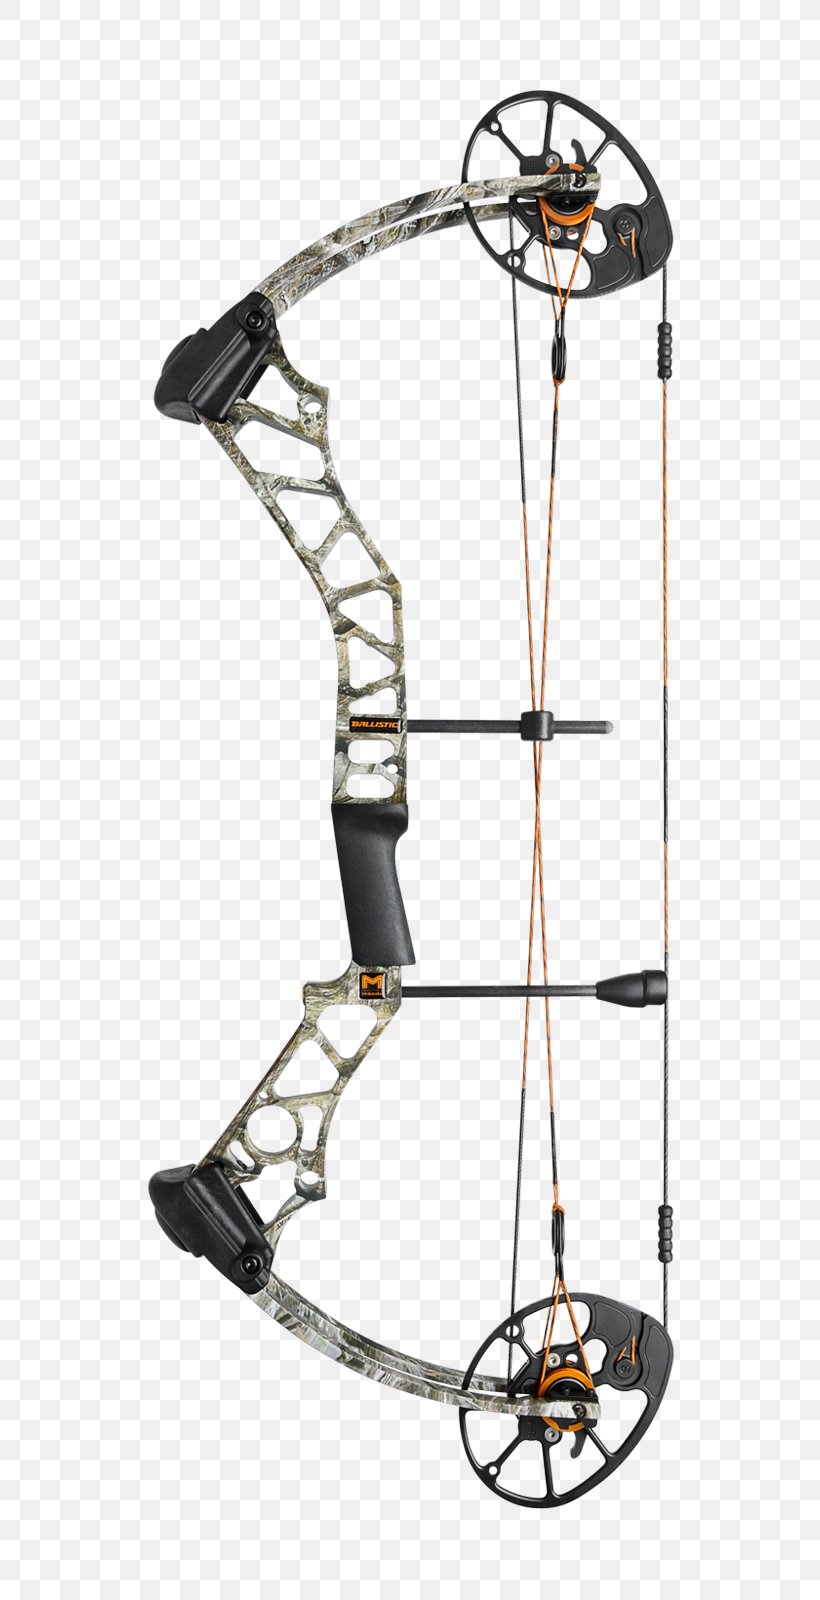 Bow And Arrow Hunting Ballistics Archery Compound Bows, PNG, 650x1600px, Bow And Arrow, Archery, Ballistics, Bow, Brand Download Free